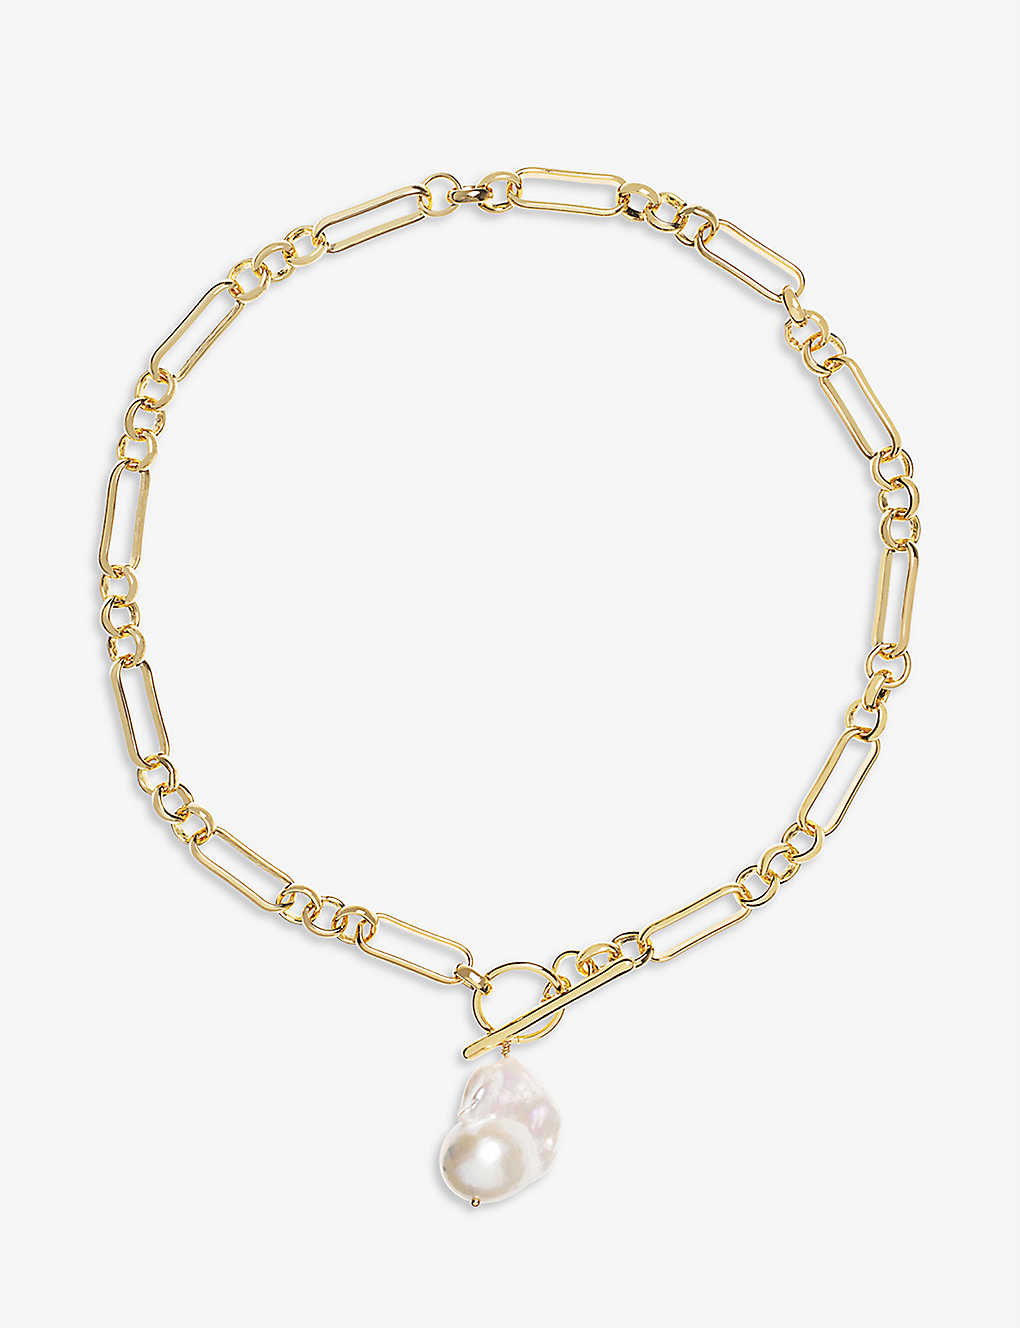 La Maison Couture Amadeus Alba 14ct Yellow Gold-plated Brass And Keshi Pearl Necklace